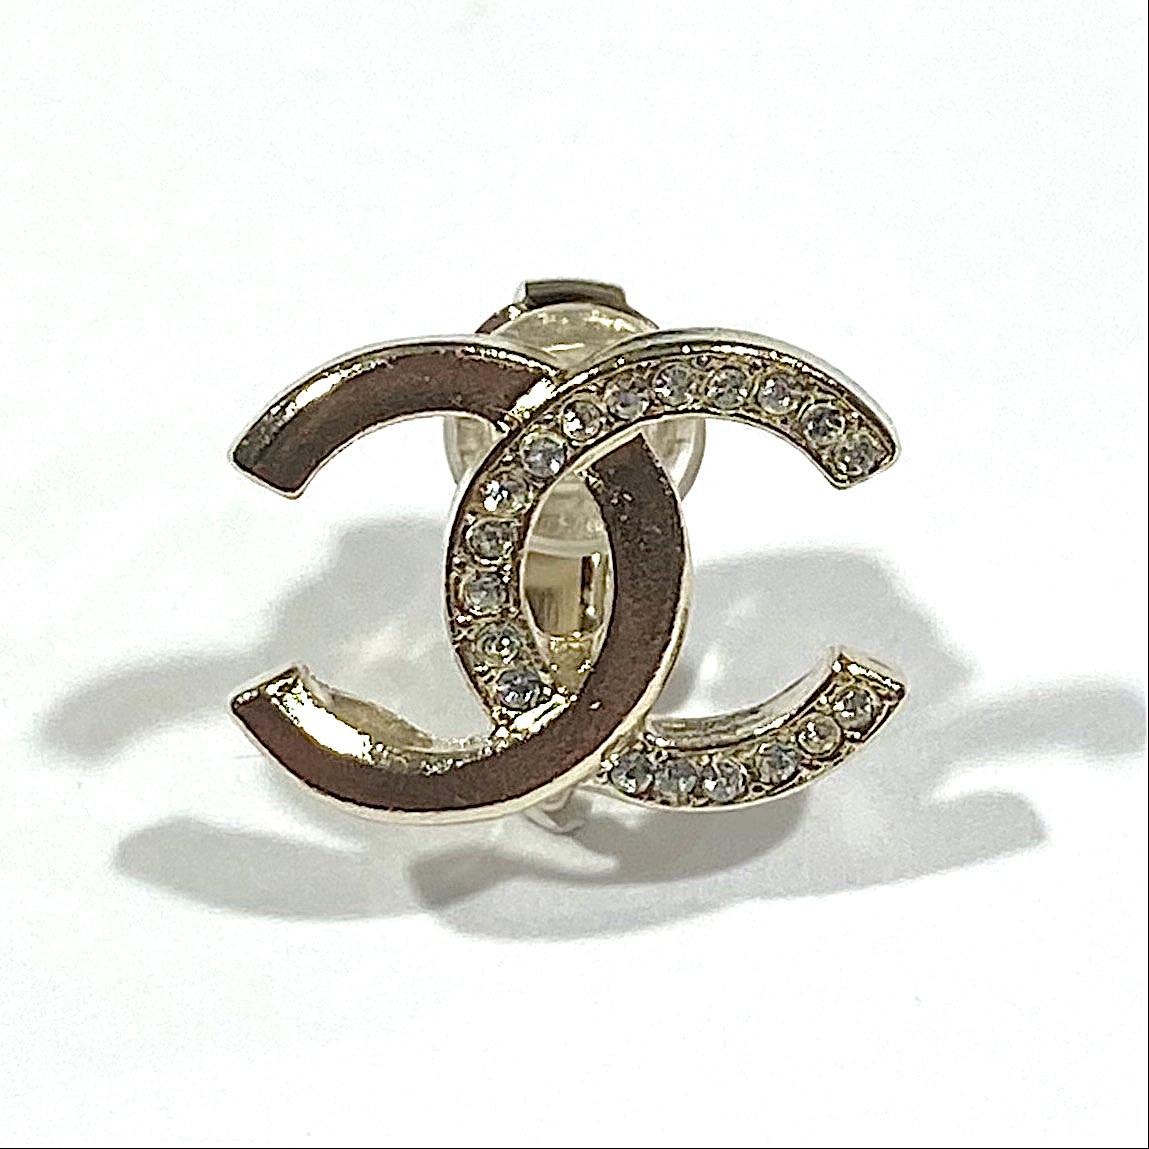 CHANEL CC Clips-on Earrings in Gilt Metal and Rhinestones
Condition: never worn
Made in France.
Dimensions: 1.7 x 1.2cm
Collection 2020.

Will be delivered in a non-original dustbag.